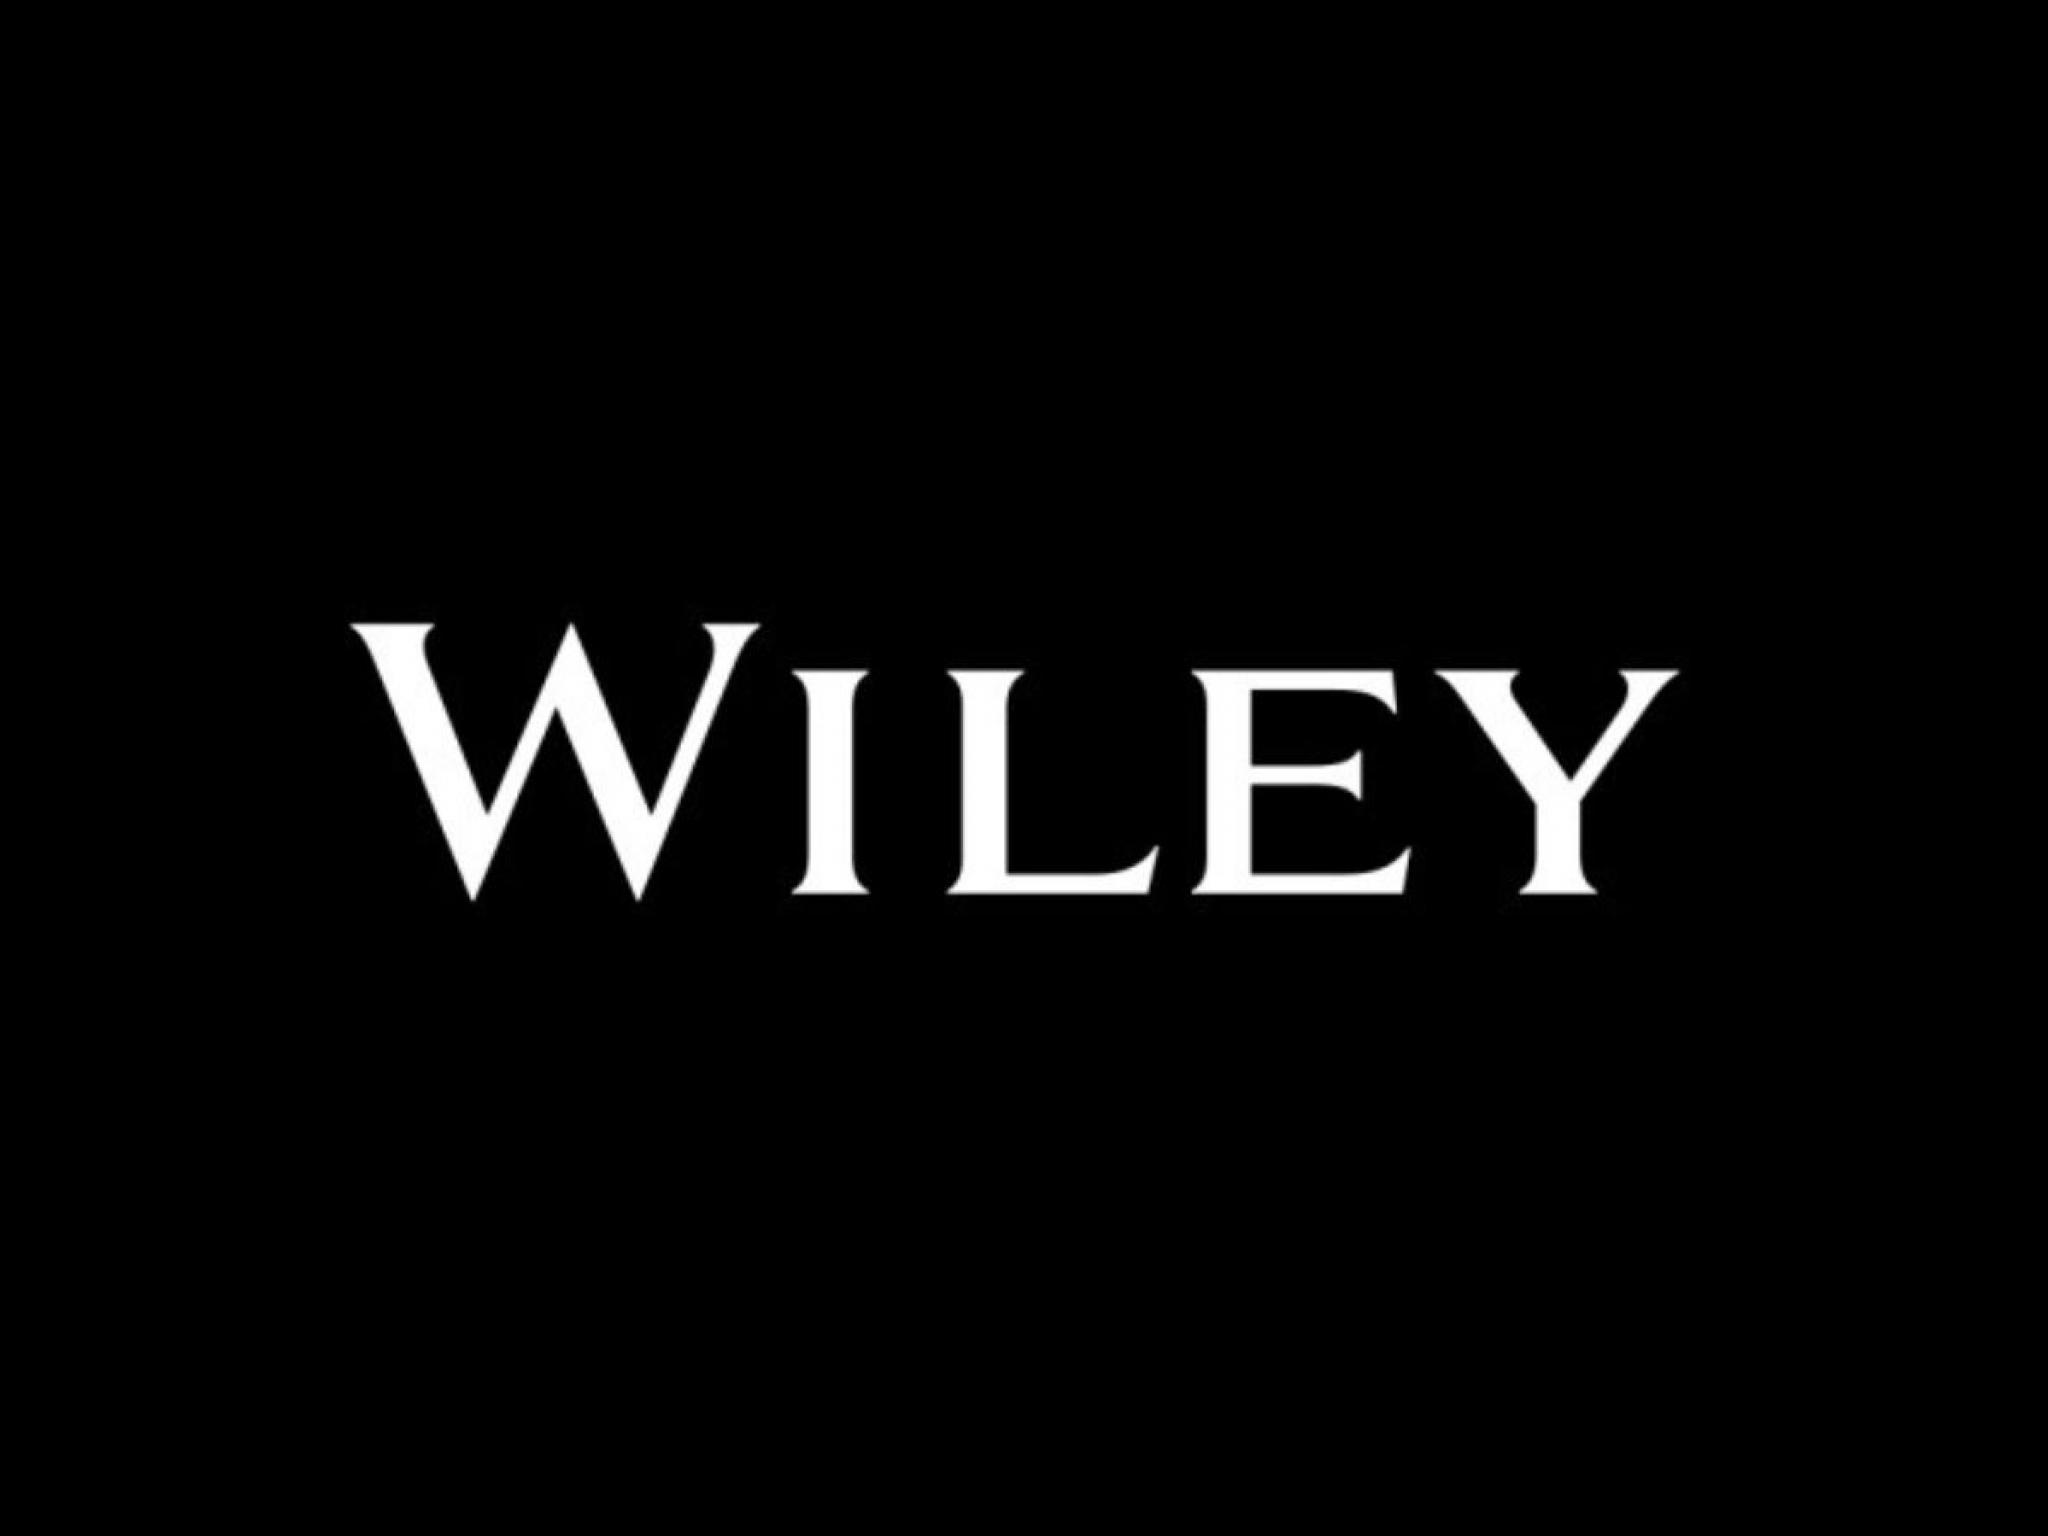  why-john-wiley--sons-shares-are-trading-lower-by-around-10-here-are-other-stocks-moving-in-thursdays-mid-day-session 